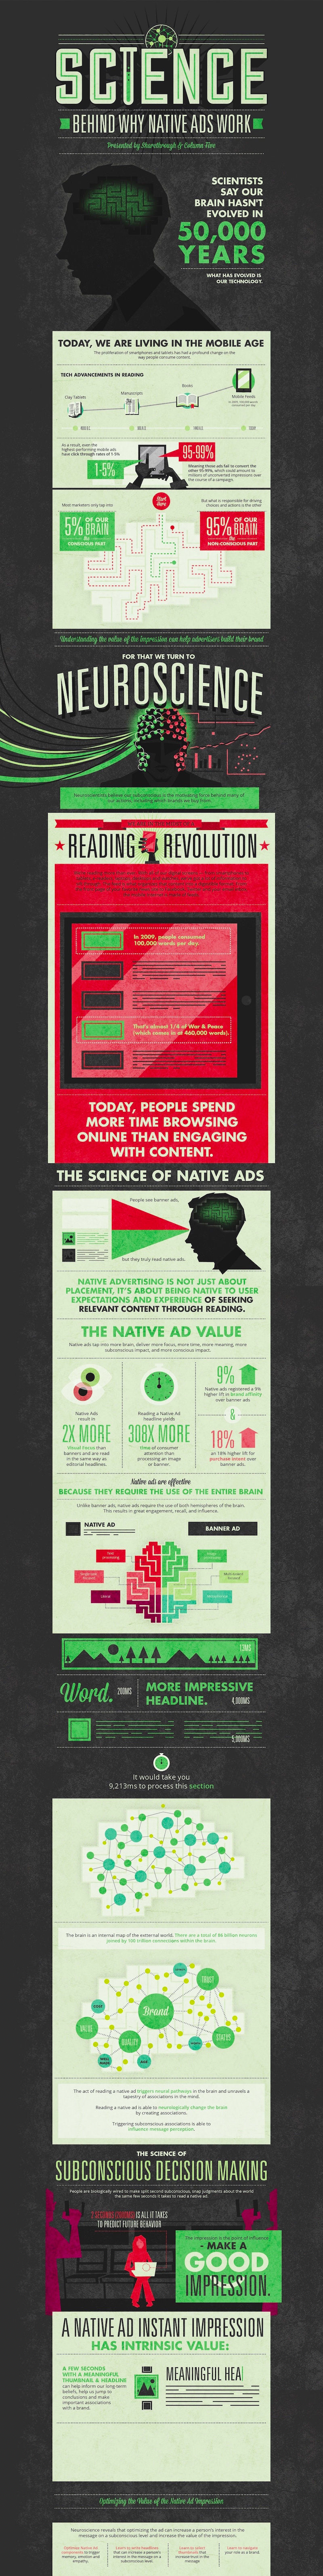 Native ads science - infographic